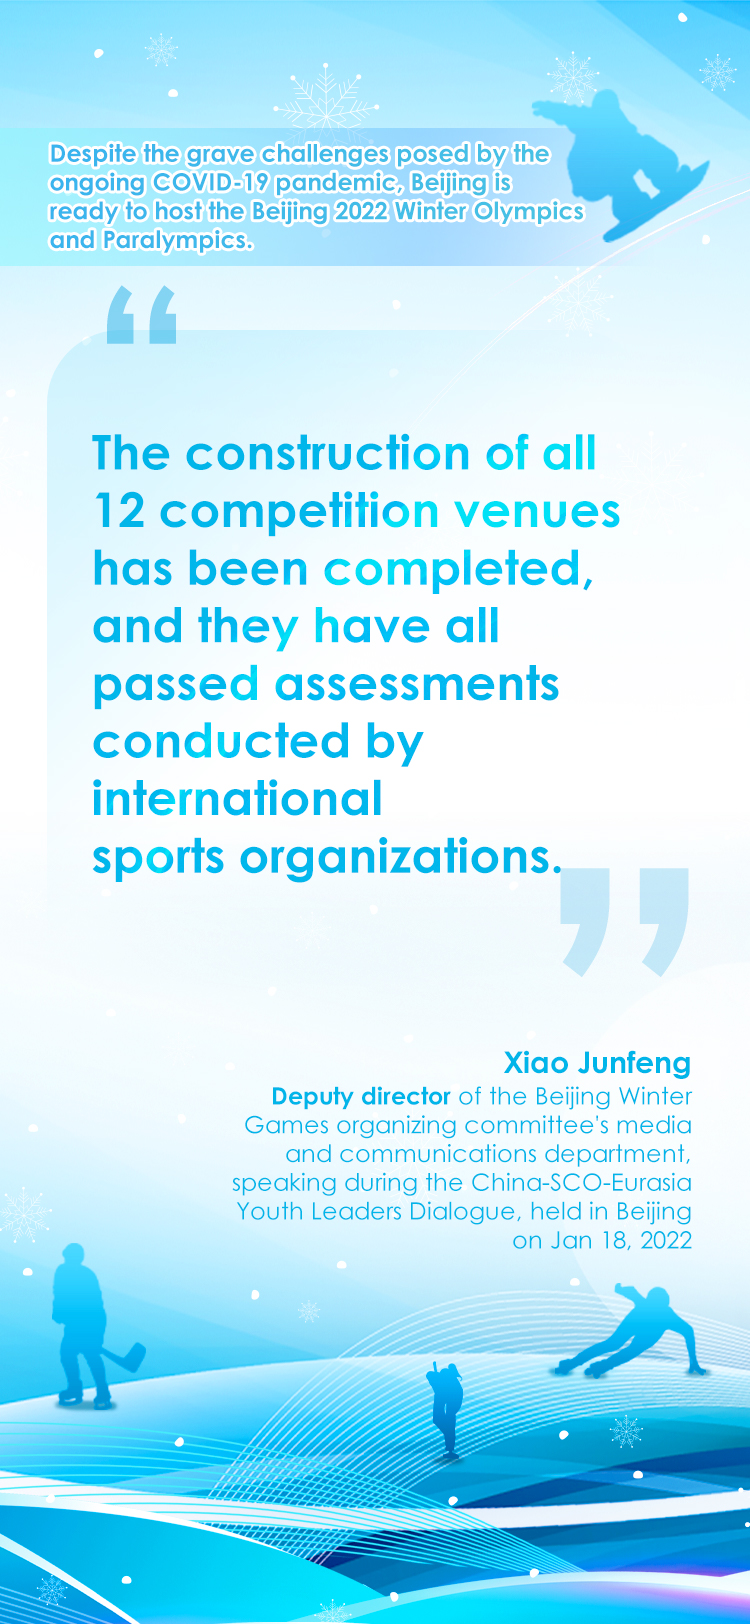 What they say about the Beijing 2022 Winter Olympics3.jpeg